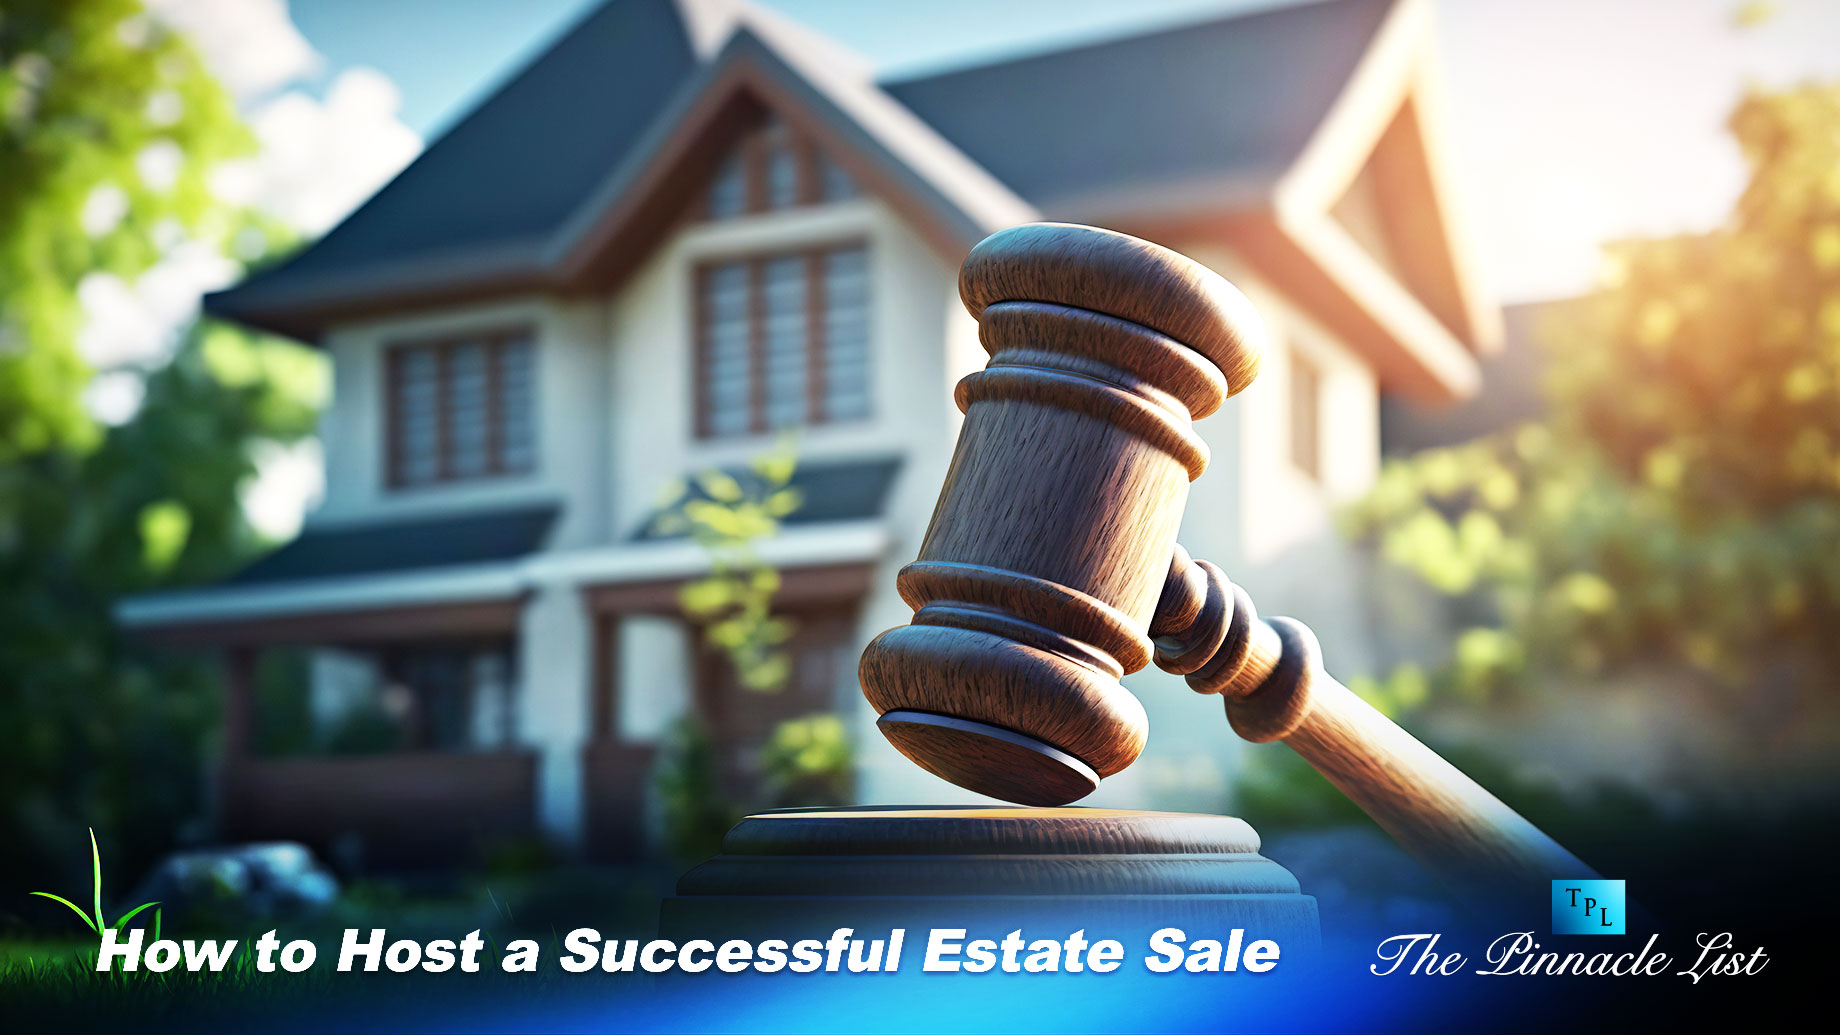 How to Host a Successful Estate Sale